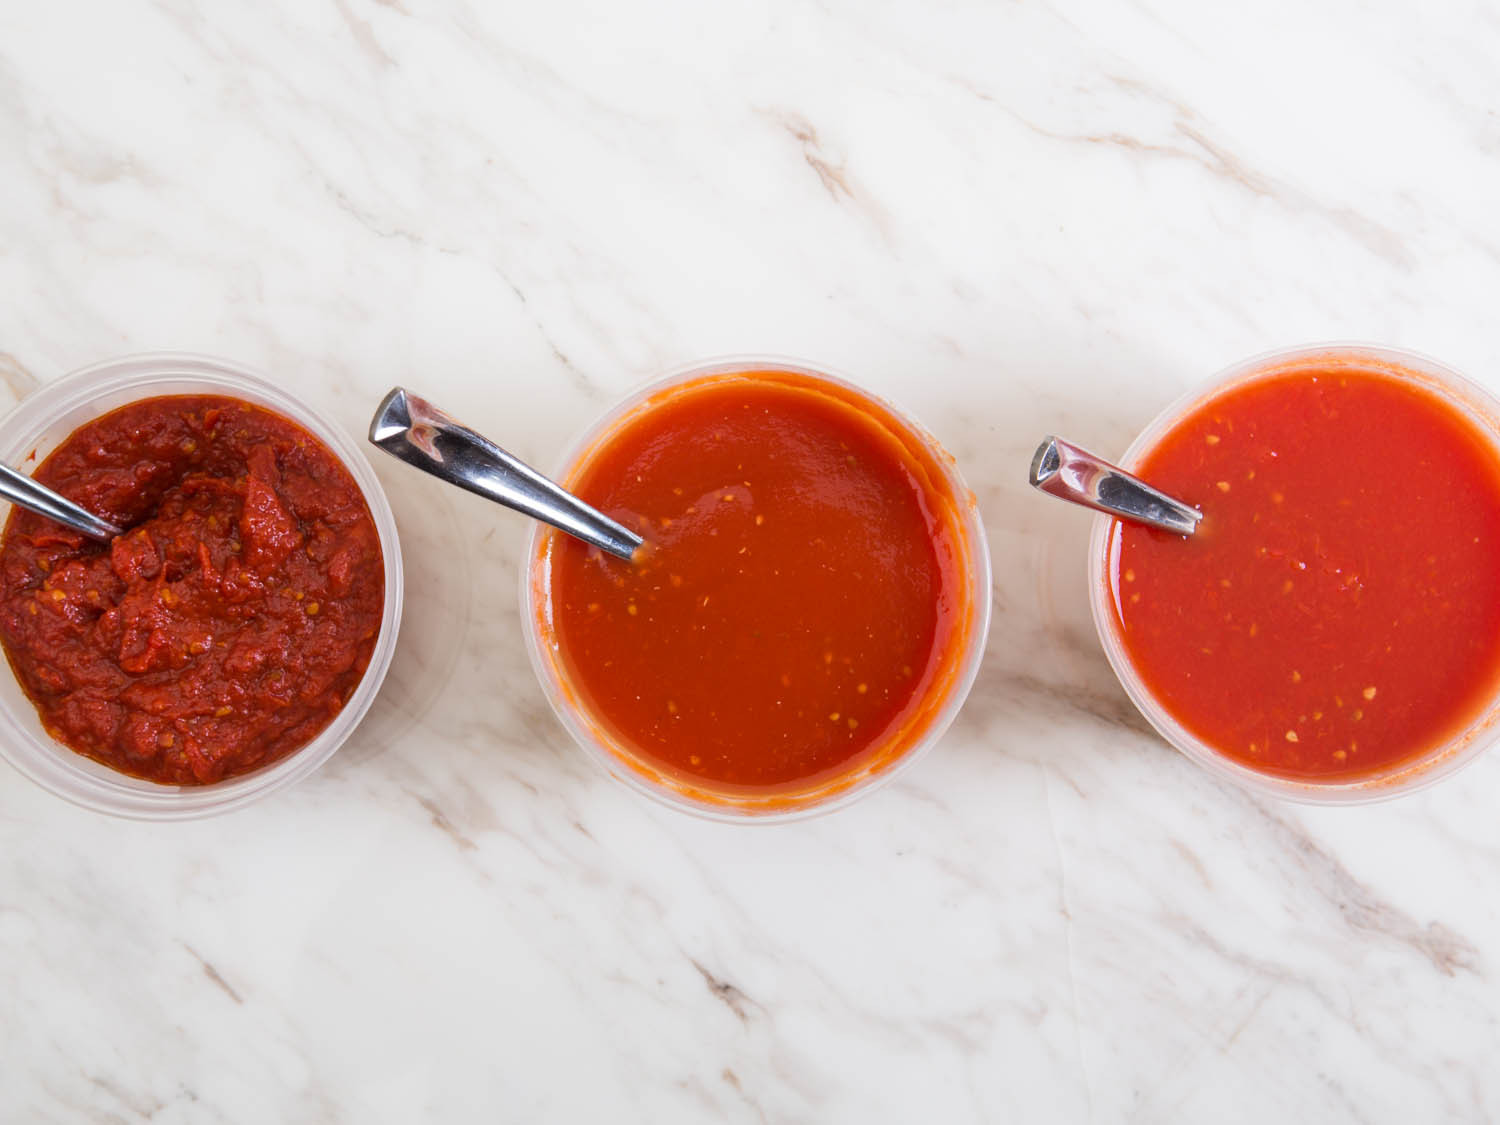 Tomato Sauce From Paste
 How to Make the Best Tomato Sauce From Fresh Tomatoes